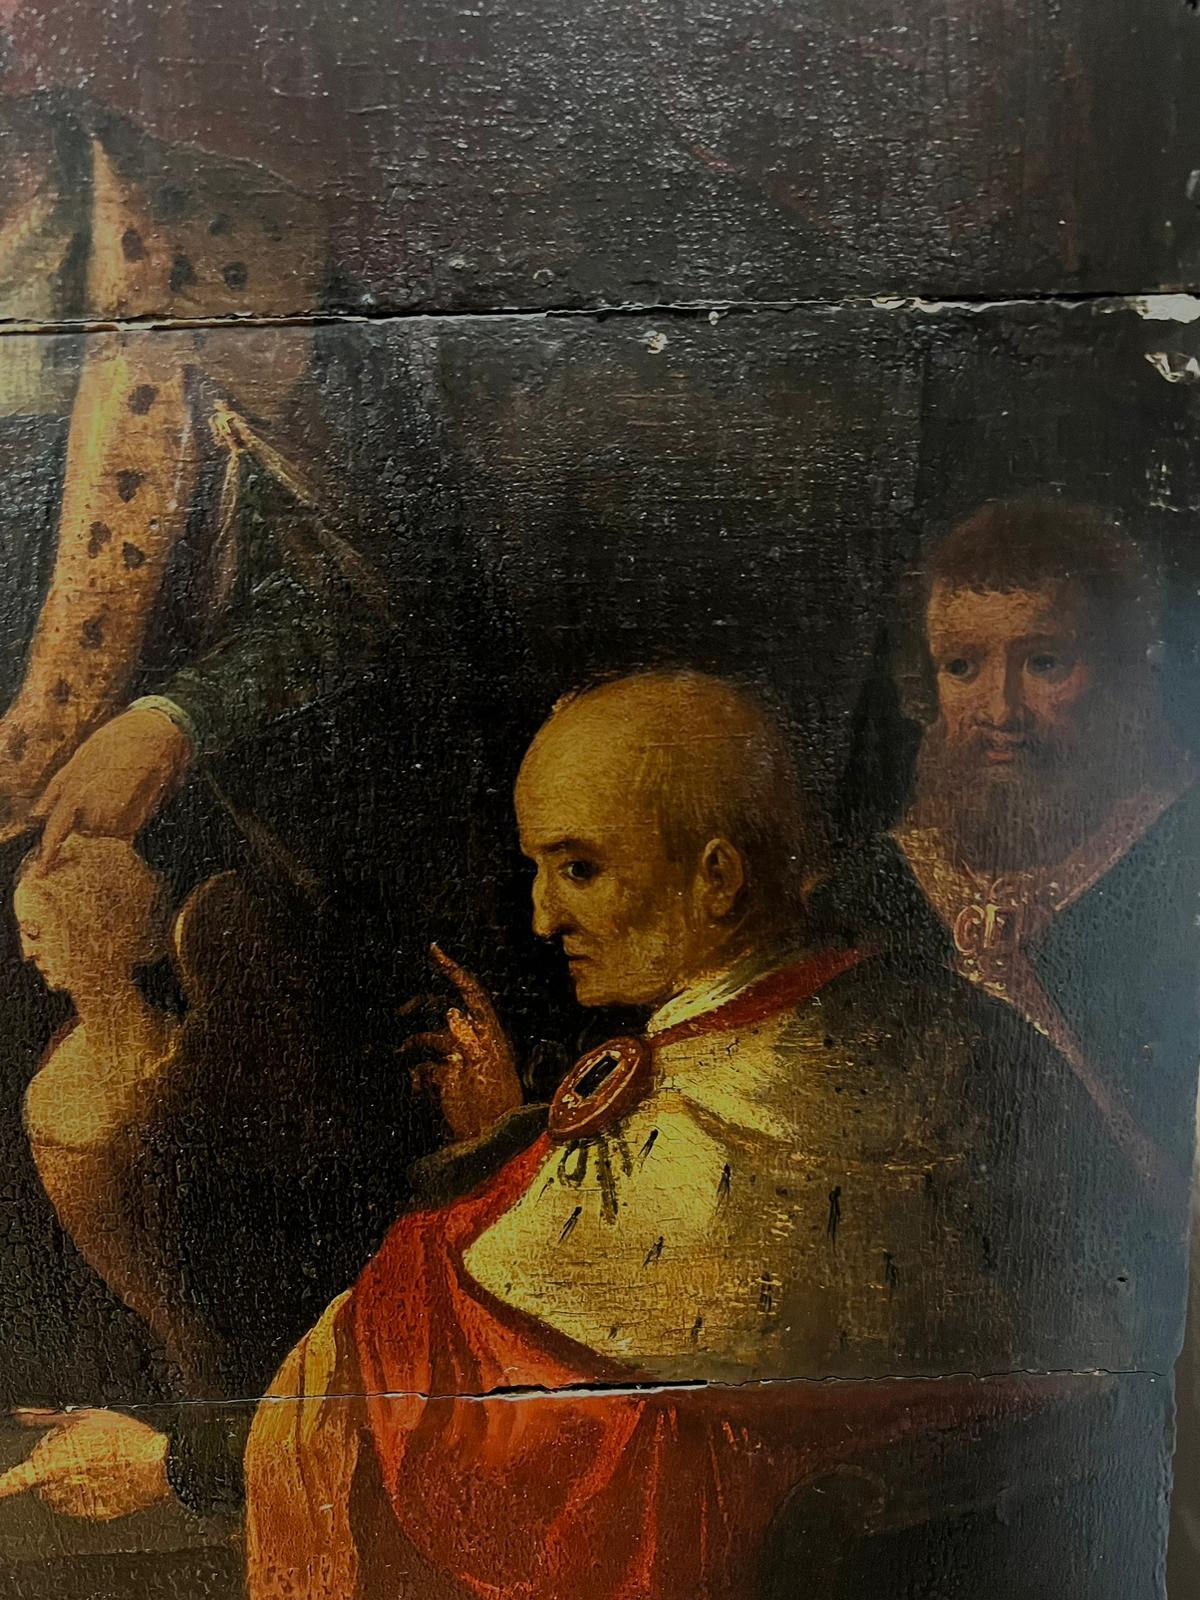 Fine 17th Century Dutch Old Master Oil on Wood Panel Ester before Ahasuerus - Old Masters Painting by Circle of Rembrandt van Rijn (Leiden 1606 - Amsterdam 1669)